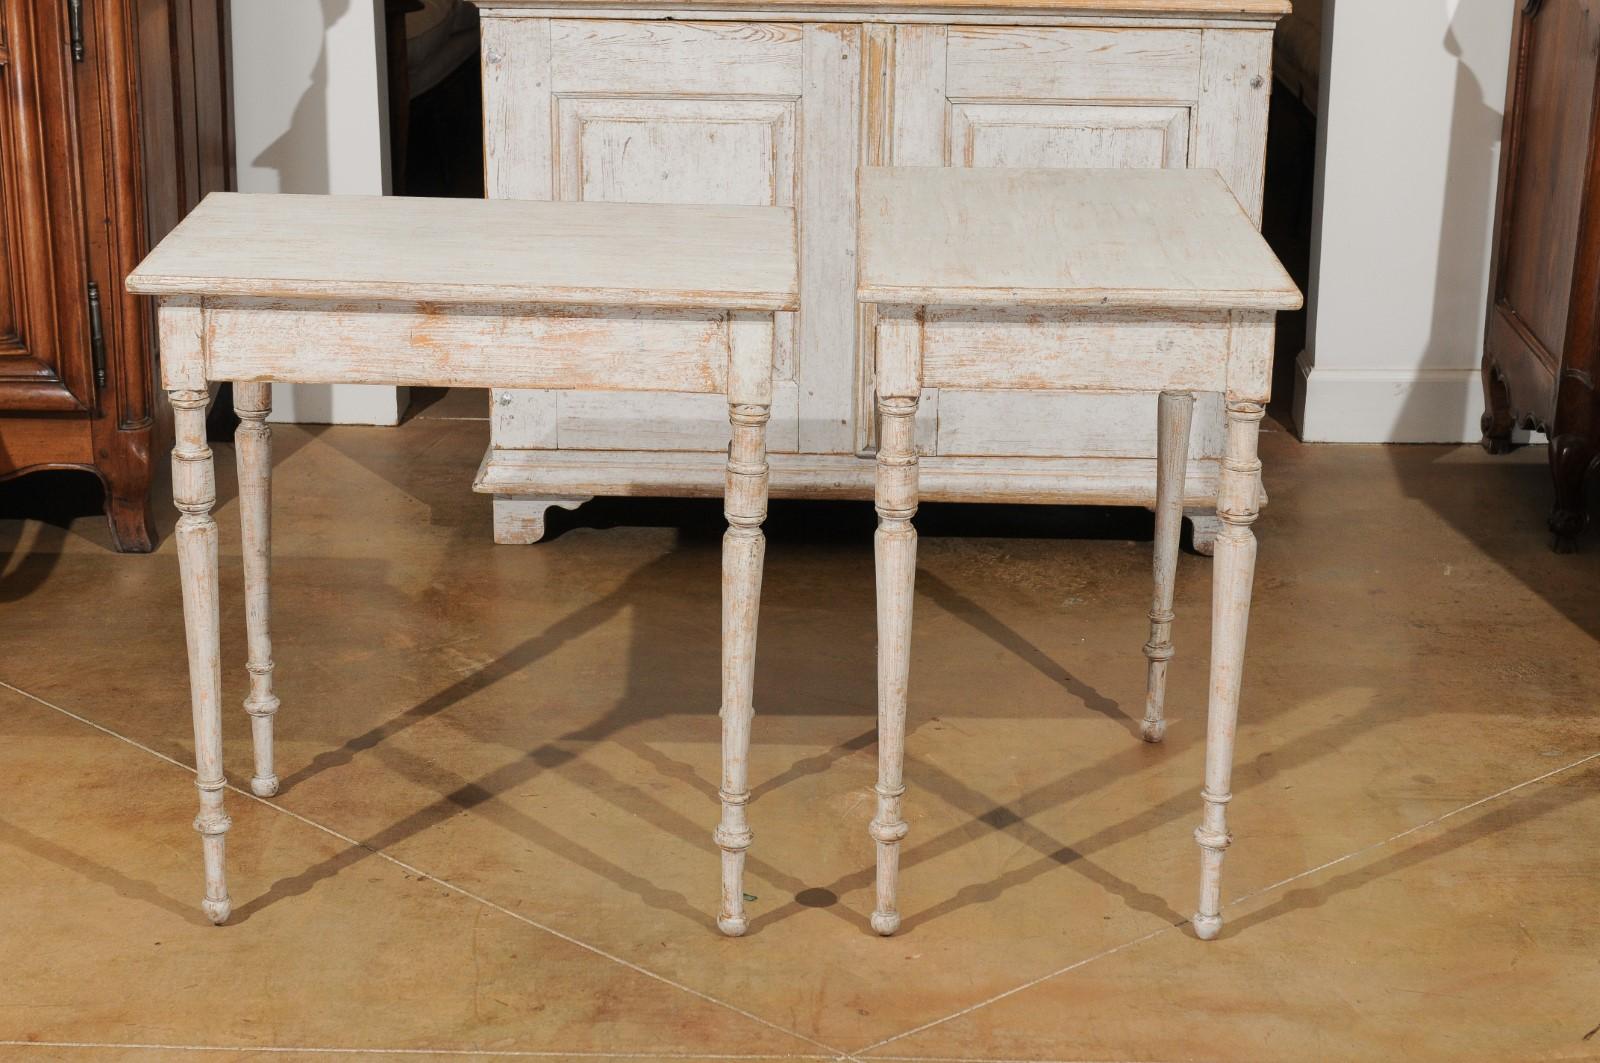 Pair of Swedish 19th Century Tables with Turned Legs and Distressed Finish 1